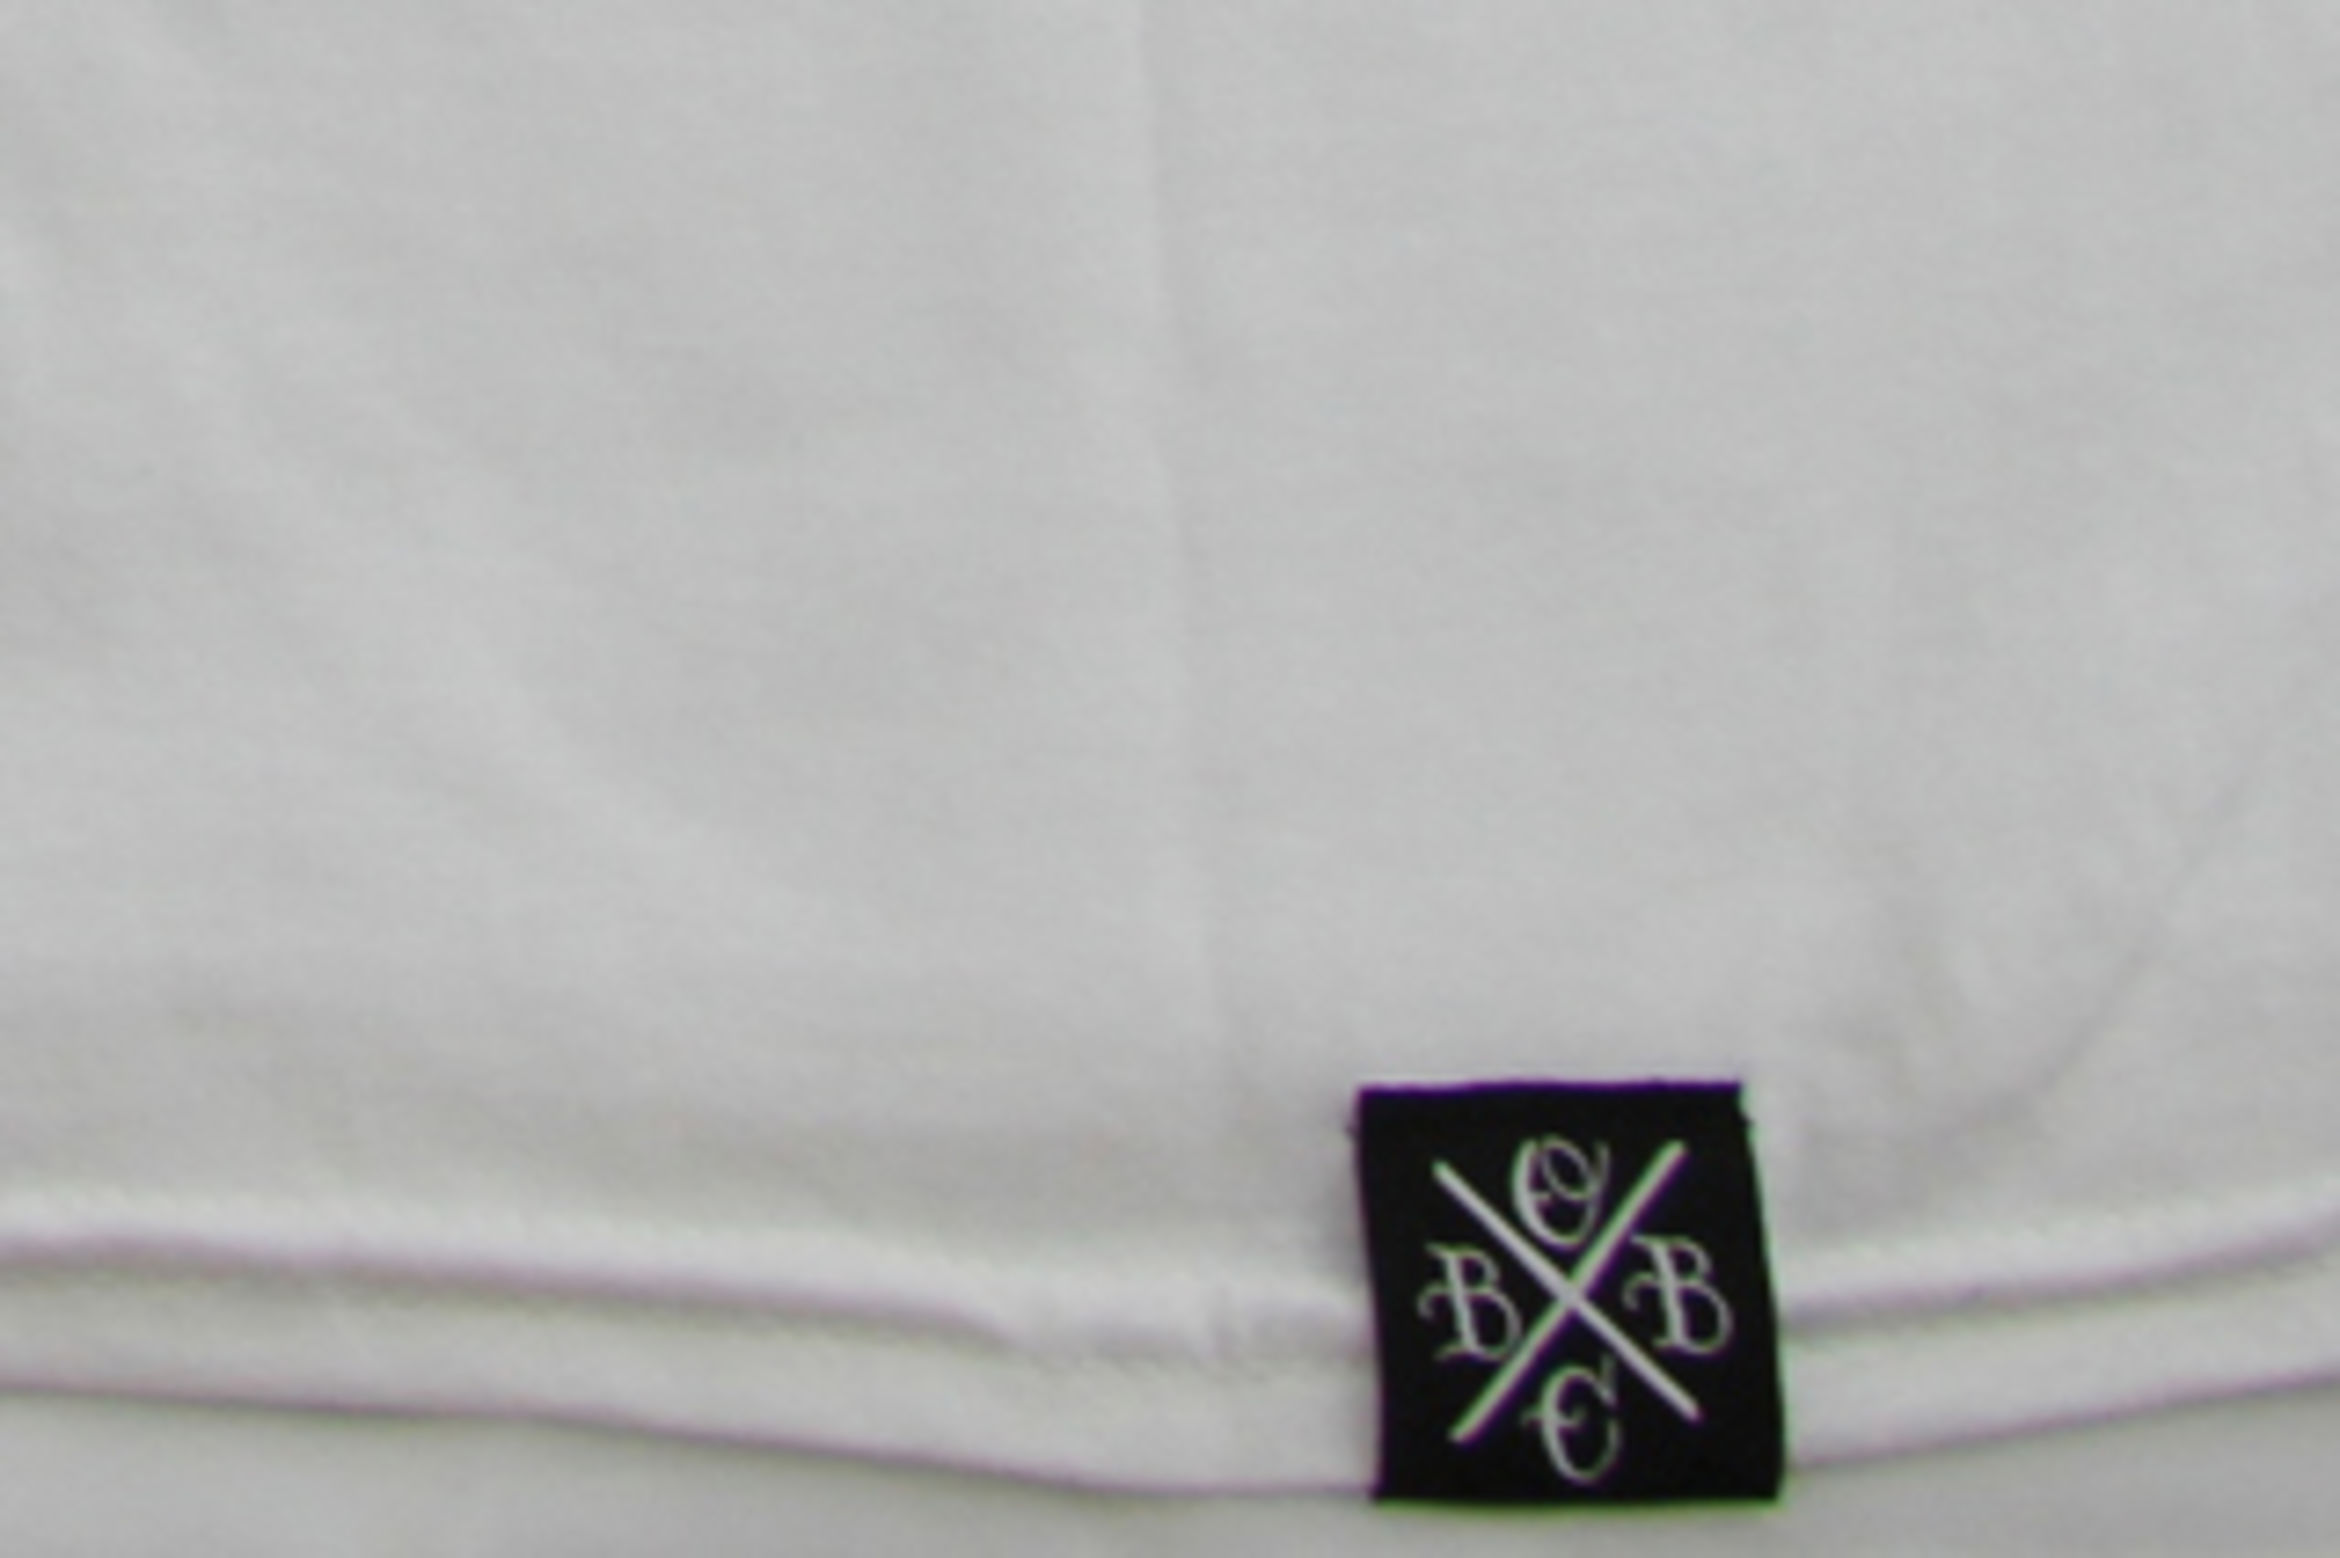 Hem tags sewn onto the bottom of garments are a great way to increase brand awareness